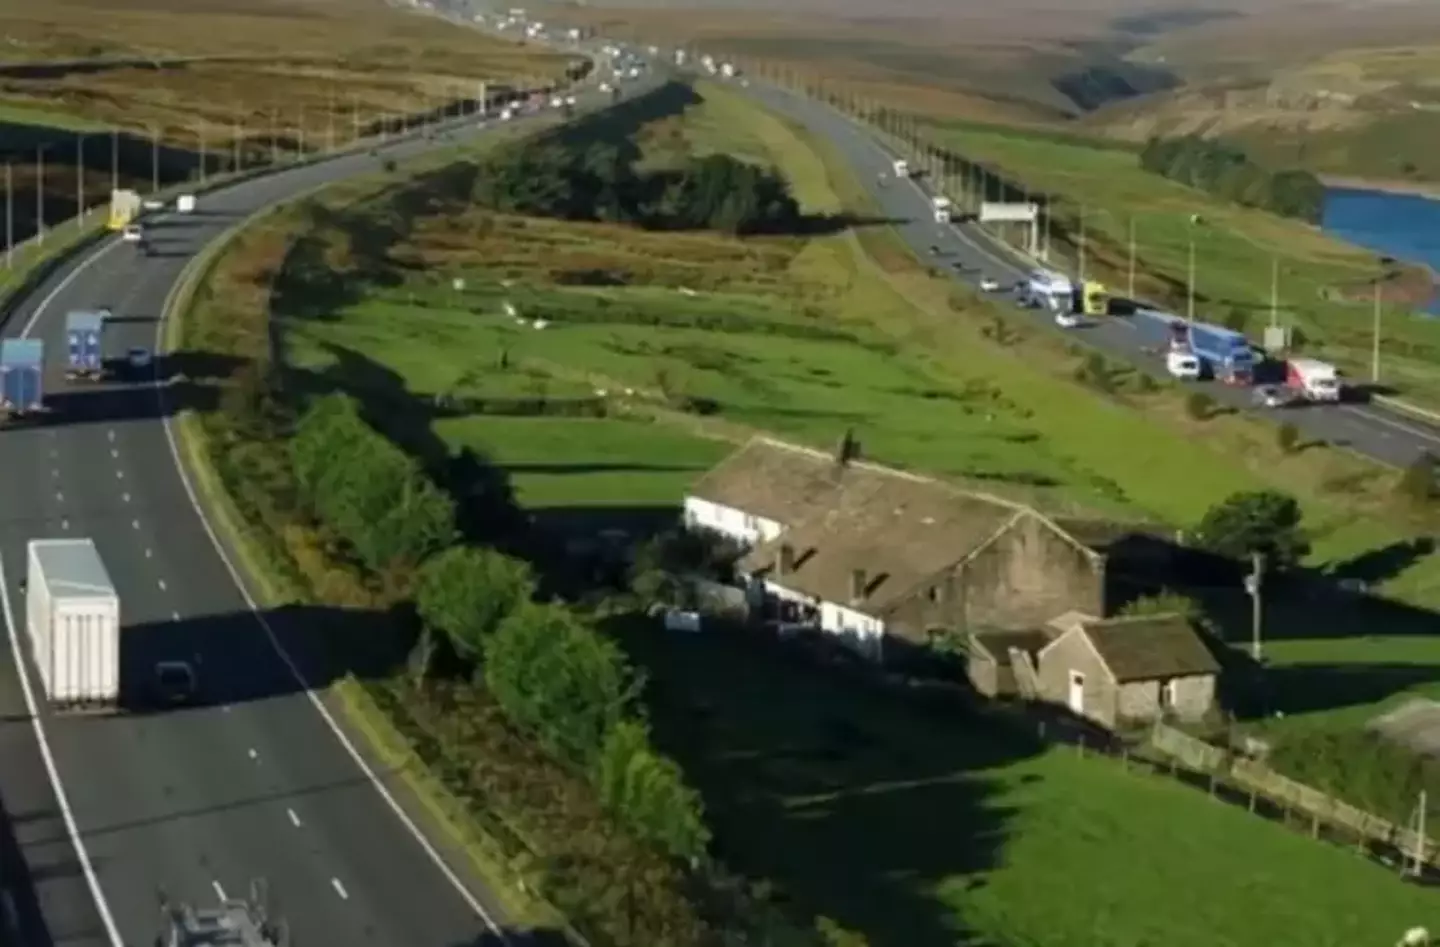 Back in the 1960s, the west-to-east motorway between Leeds and Manchester was built around the Farm: